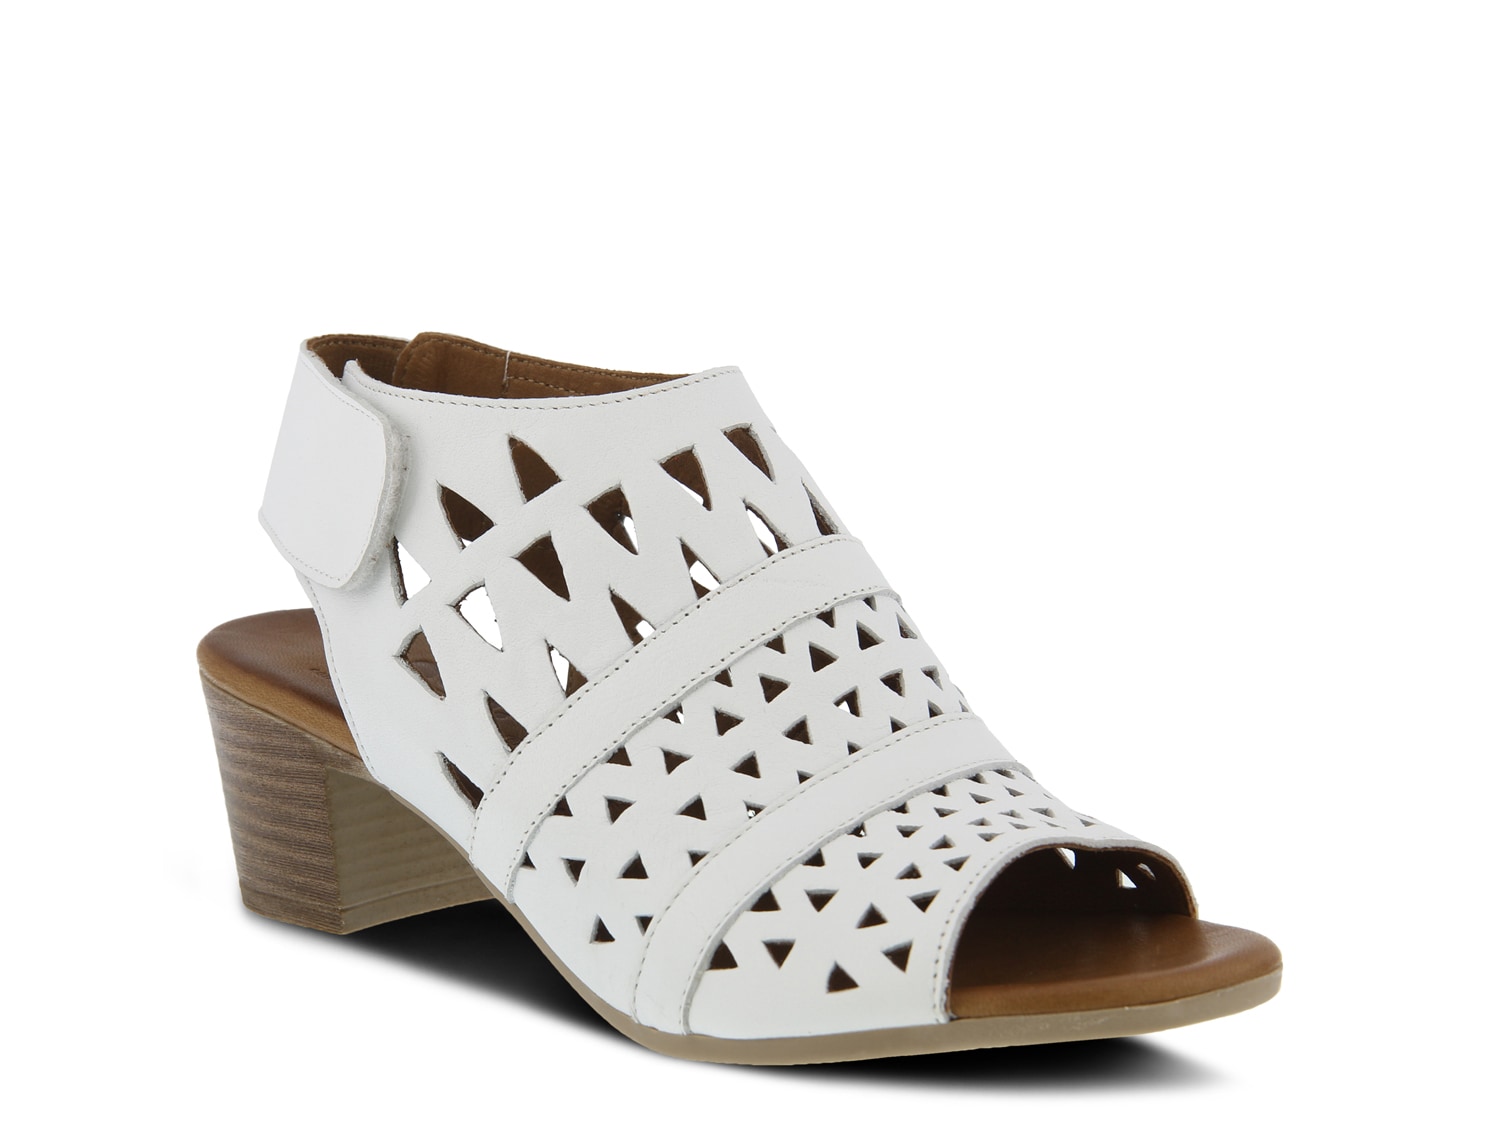 spring step shoes dsw